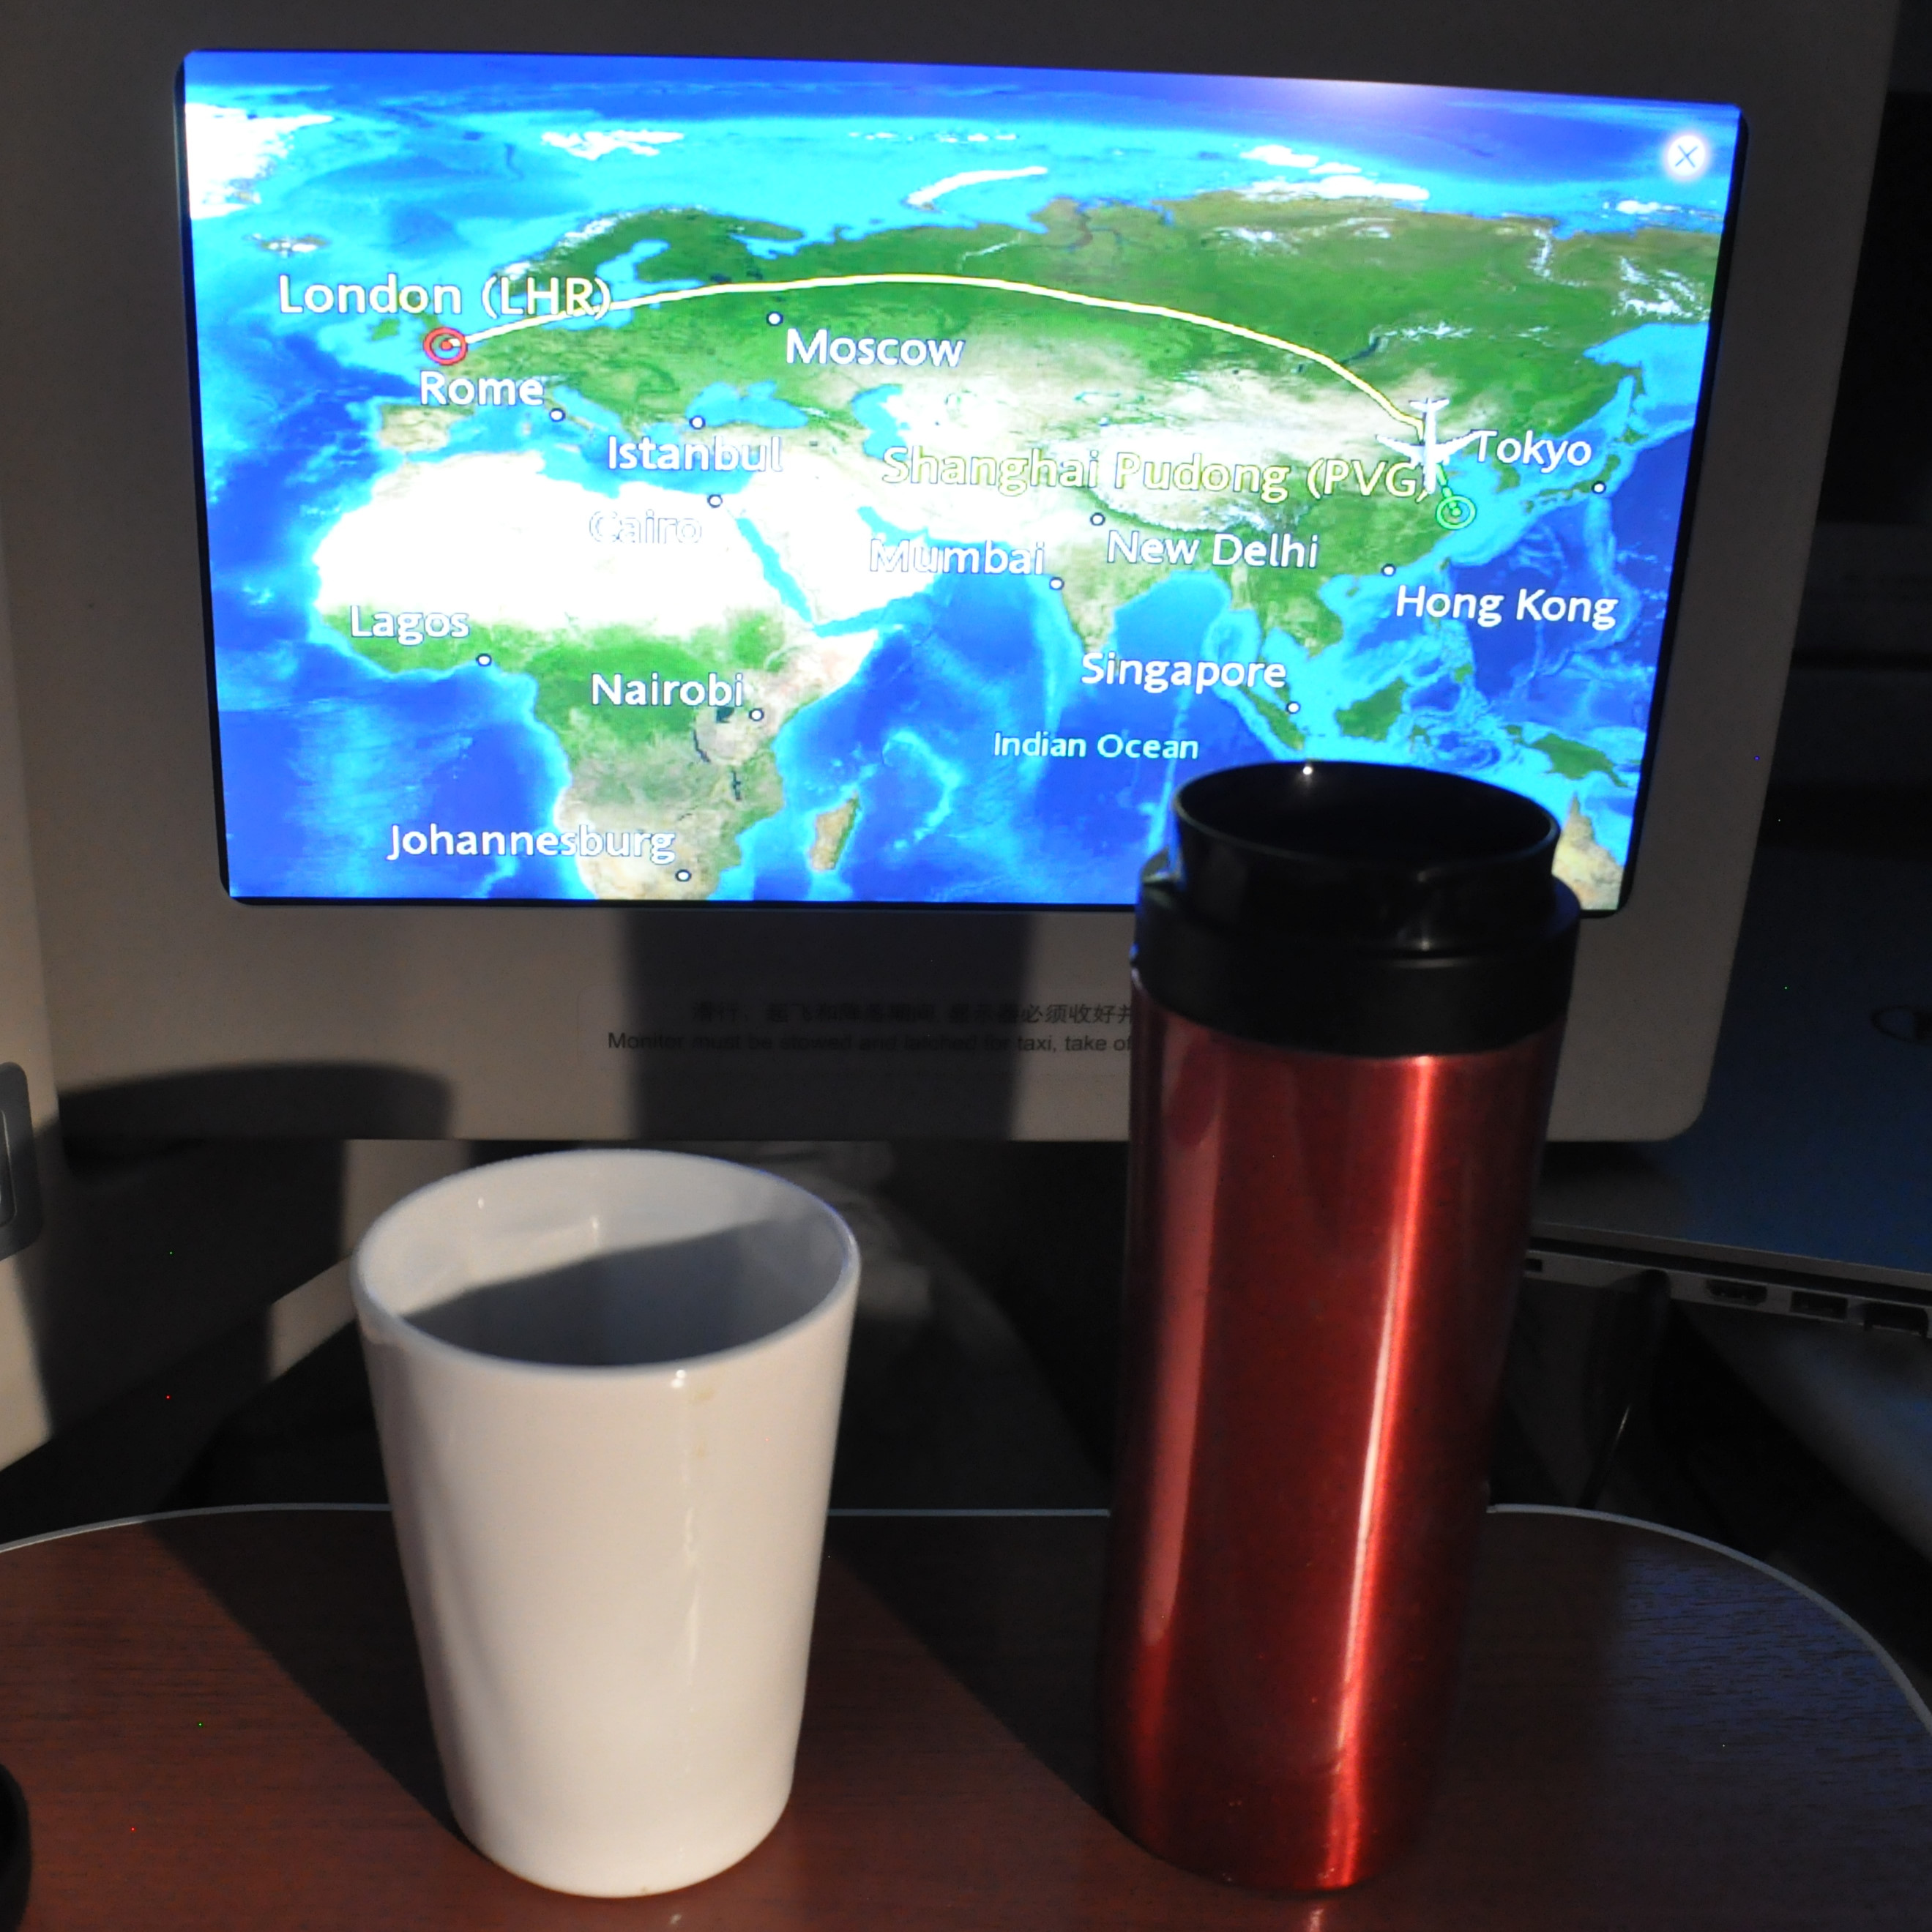 Celebrating a successful flight in business class with China Eastern to Shanghai with some coffee made in my Travel Press and served in my Therma Cup.